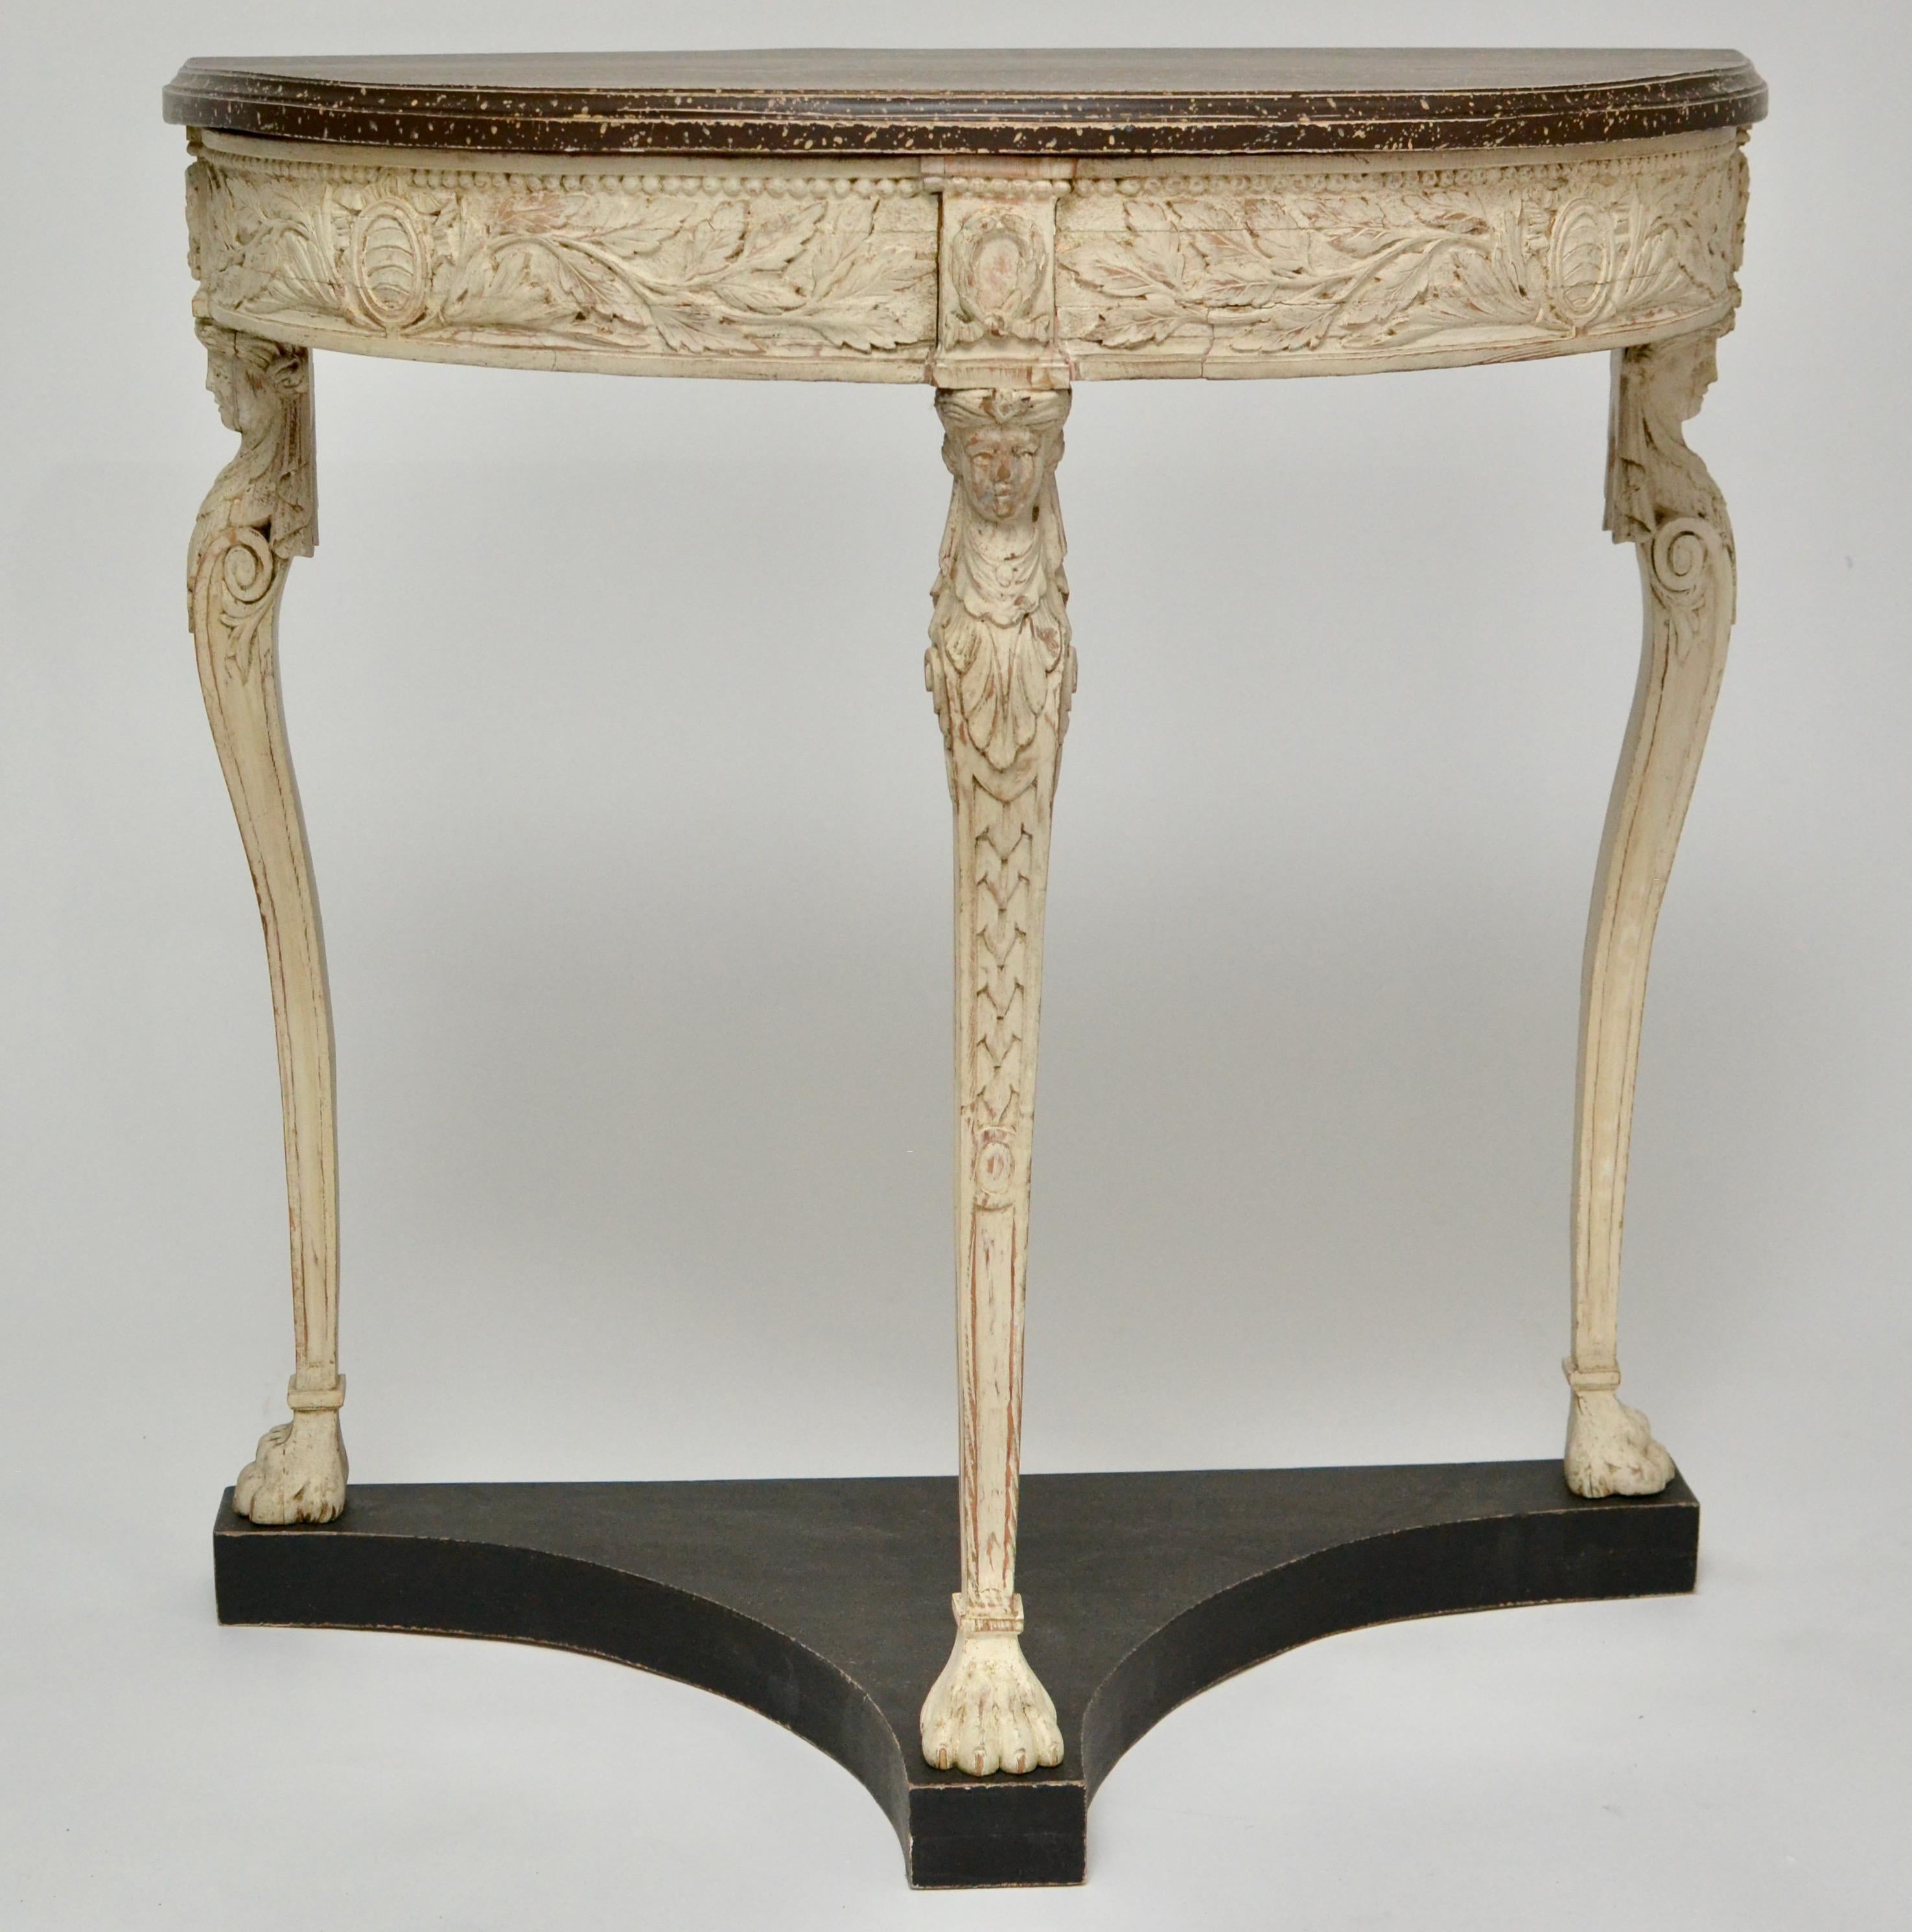 An unusual wood carved and white painted late gustavian demi-lune console table with a faux porphyry painted top. From around 1800. Possibly Swedish.